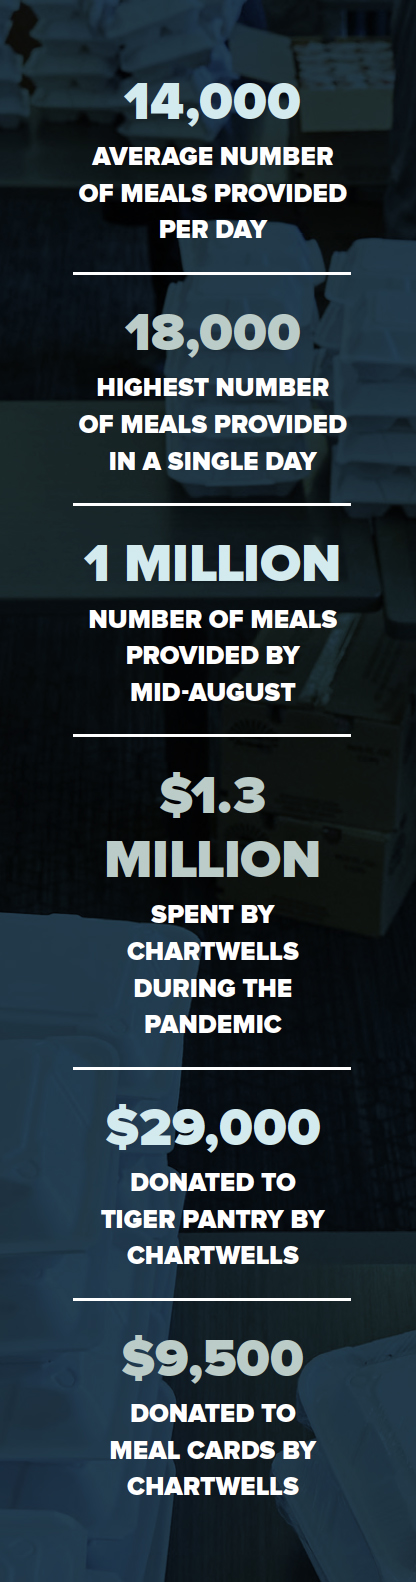 14,000 AVERAGE NUMBER OF MEALS PROVIDED PER DAY | 18,000 HIGHEST NUMBER OF MEALS PROVIDED IN A SINGLE DAY  |  1 MILLION NUMBER OF MEALS PROVIDED BY MID-AUGUST | $1.3 MILLION SPENT BY CHARTWELLS DURING THE PANDEMIC | $29,000 DONATED TO TIGER PANTRY BY CHARTWELLS | $9,500 DONATED TO MEAL CARDS BY CHARTWELLS